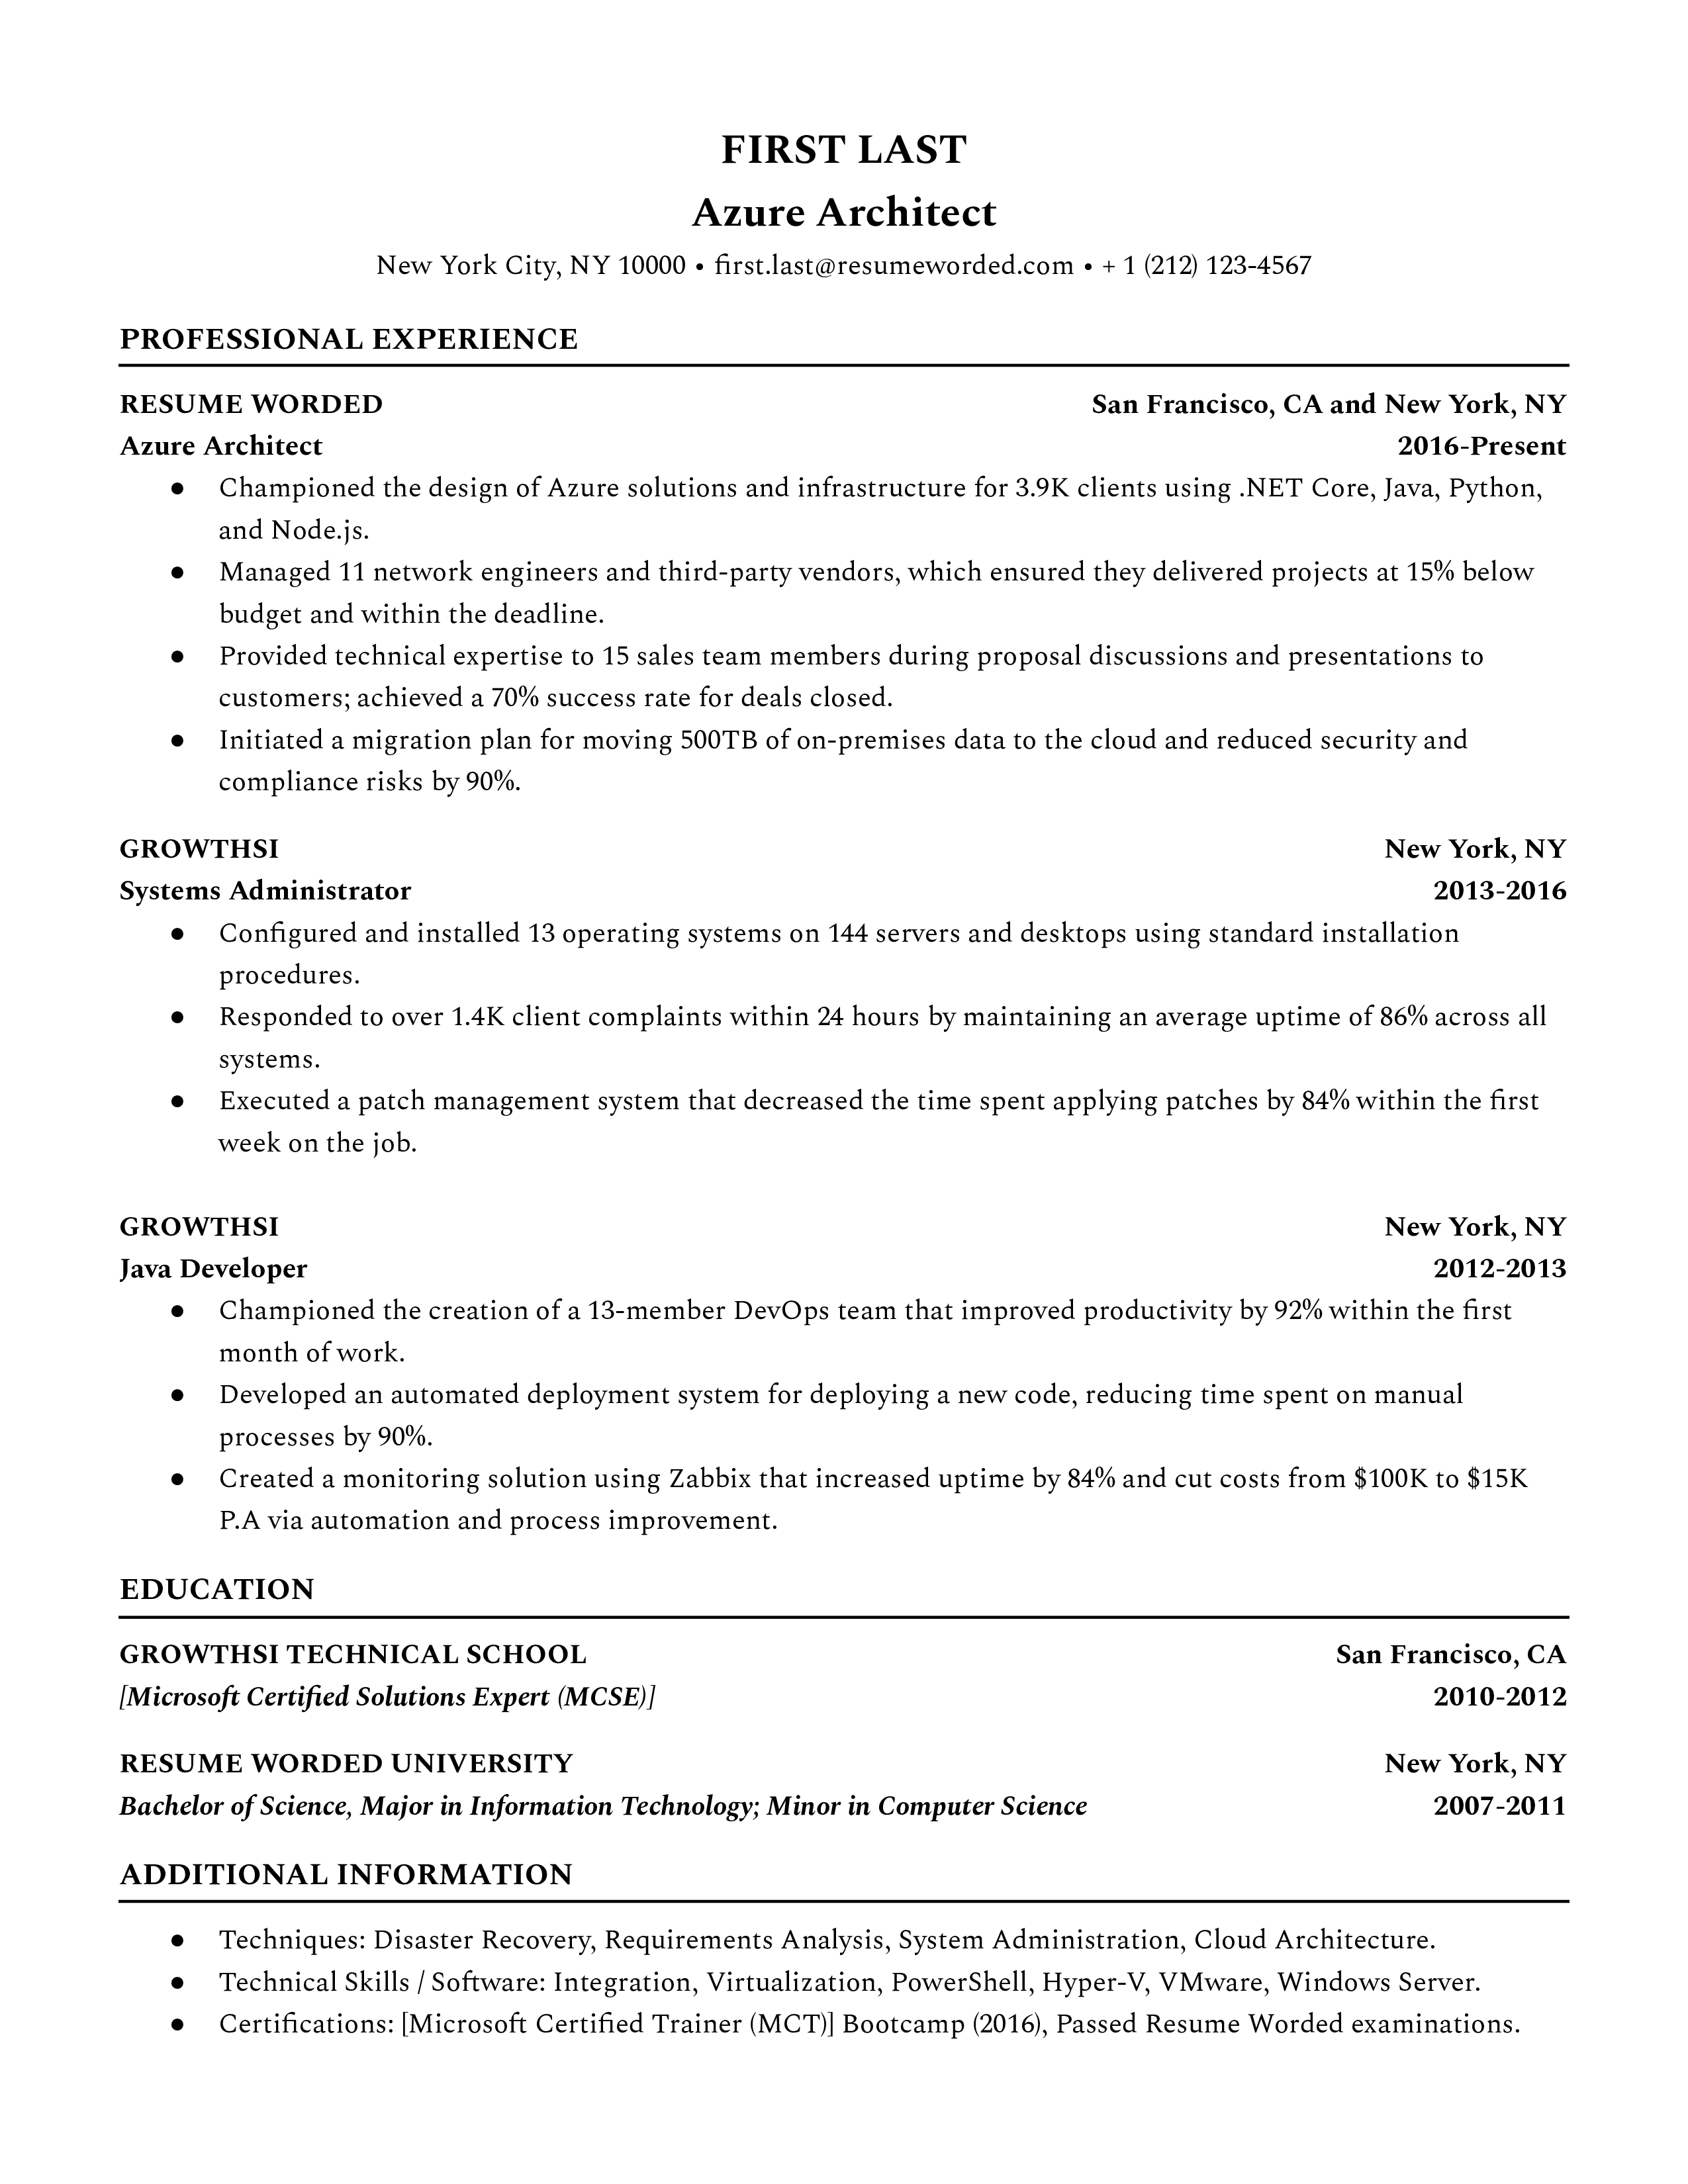 A well-structured CV for an Azure Architect role, showcasing relevant experience and certifications.